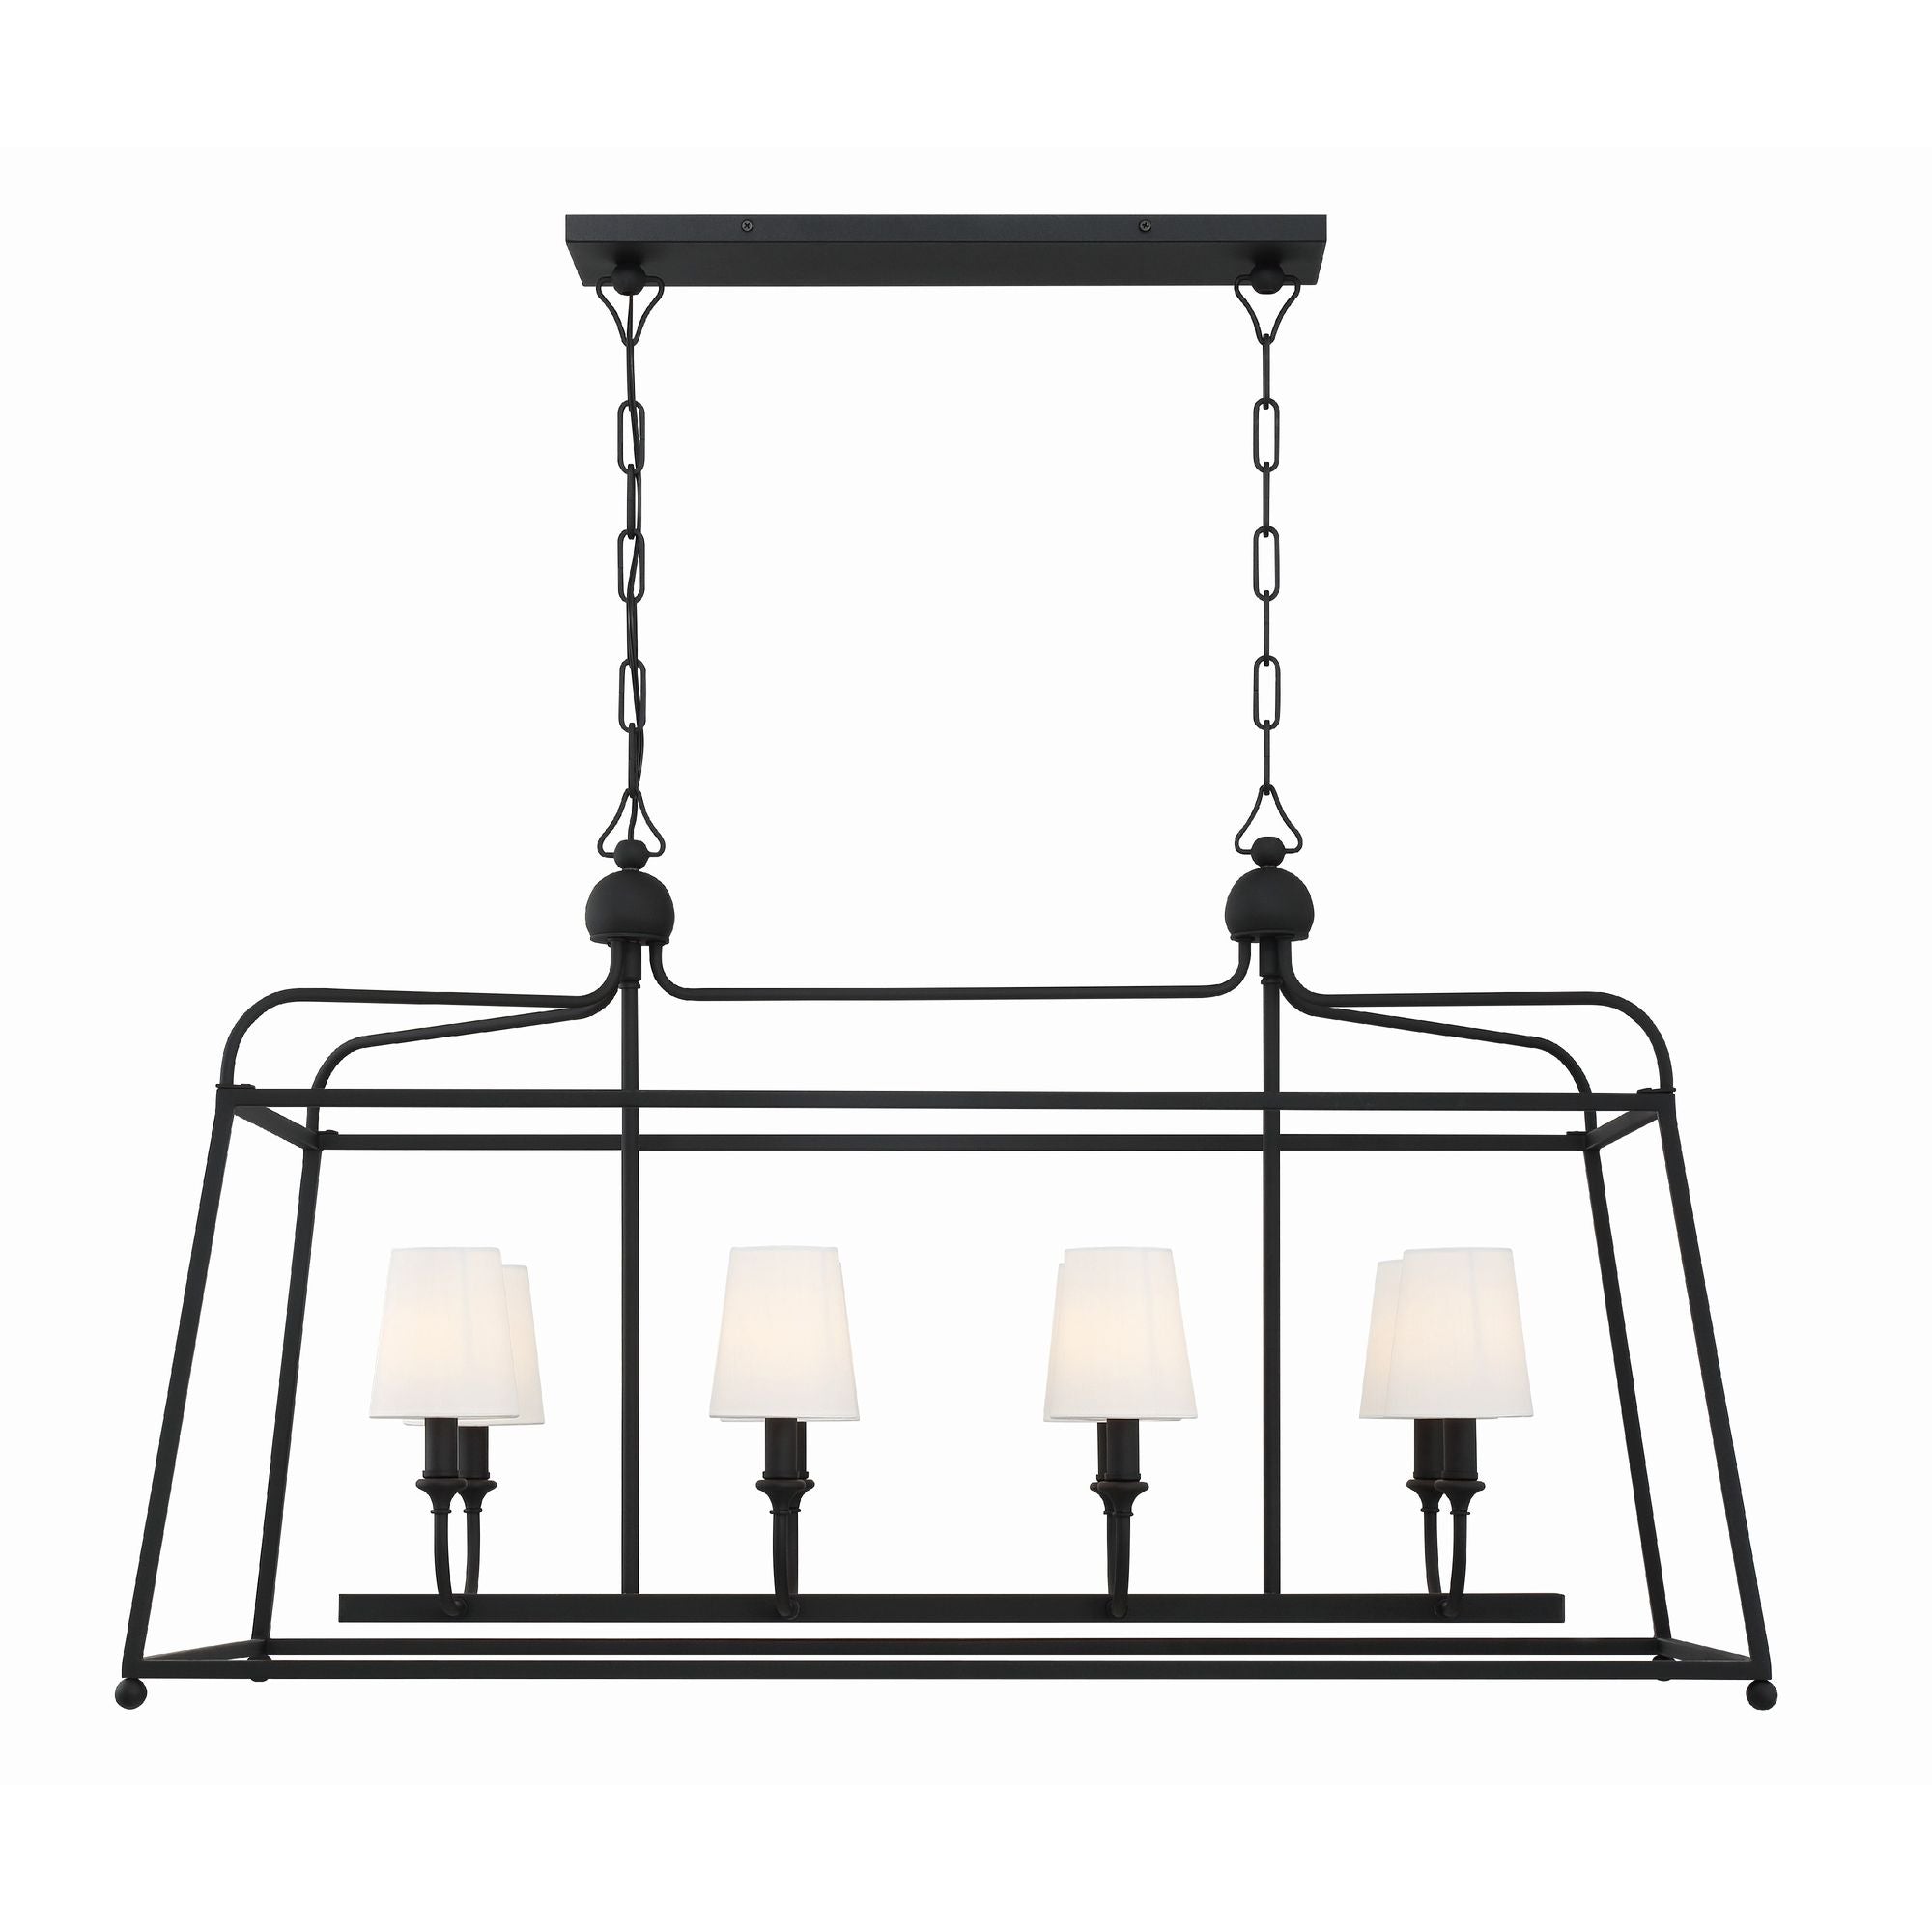 Libby Langdon for Crystorama Sylvan 8 Light Black Forged Chandelier